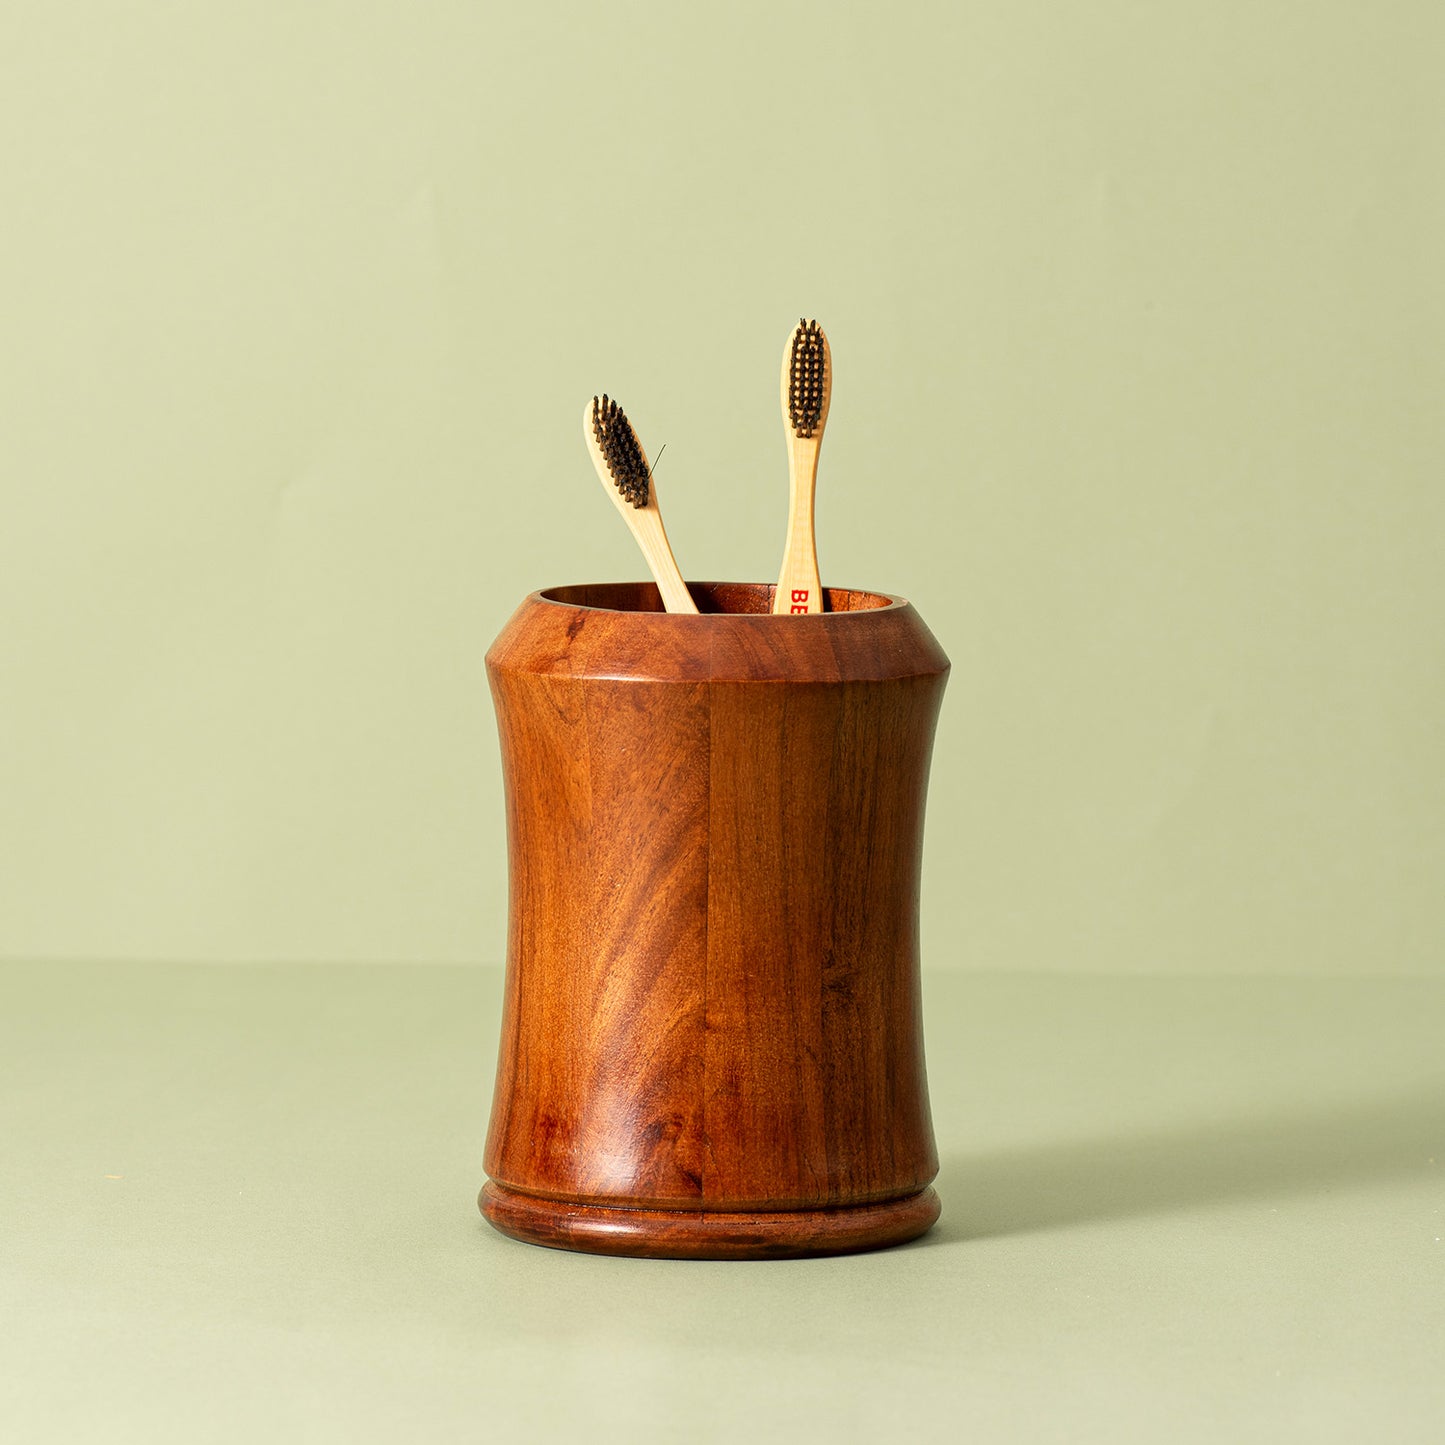 Urban Chic: Spoon Stand